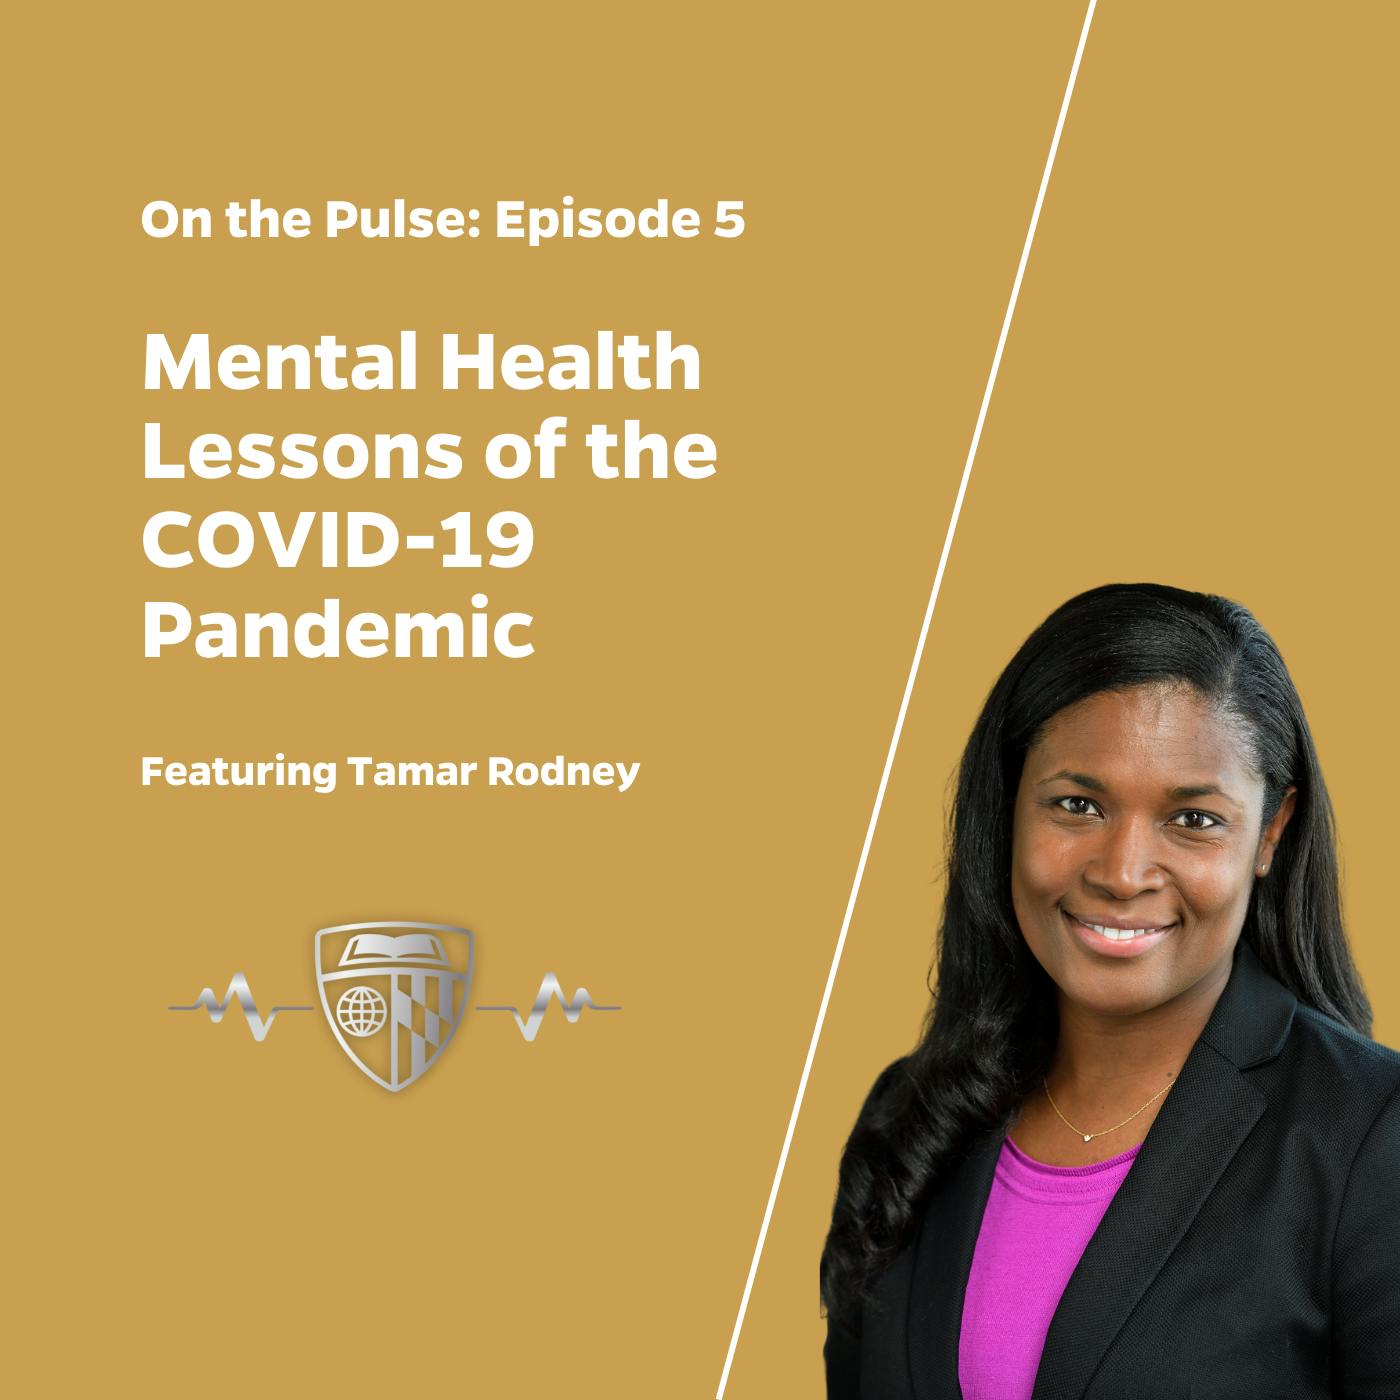 Episode 5: Mental Health Lessons of the COVID-19 Pandemic